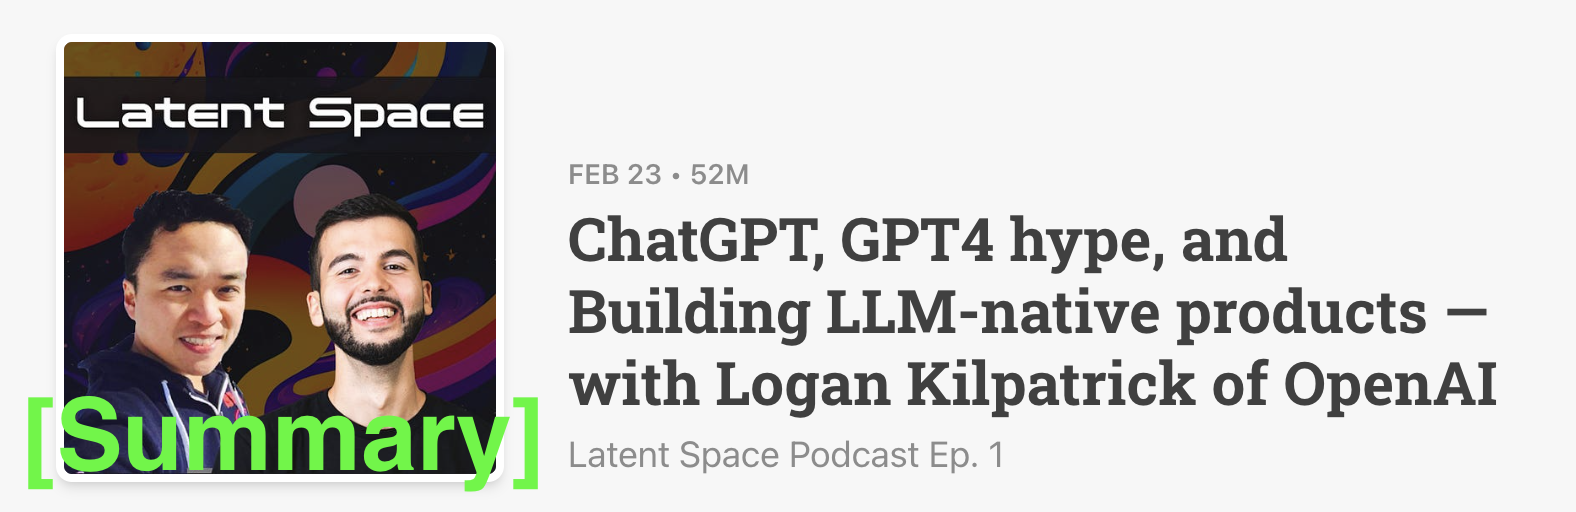 Latent Space Podcast 2/23 [Summary] - ChatGPT, GPT4 hype, and Building LLM-native products — with Logan Kilpatrick of OpenAI